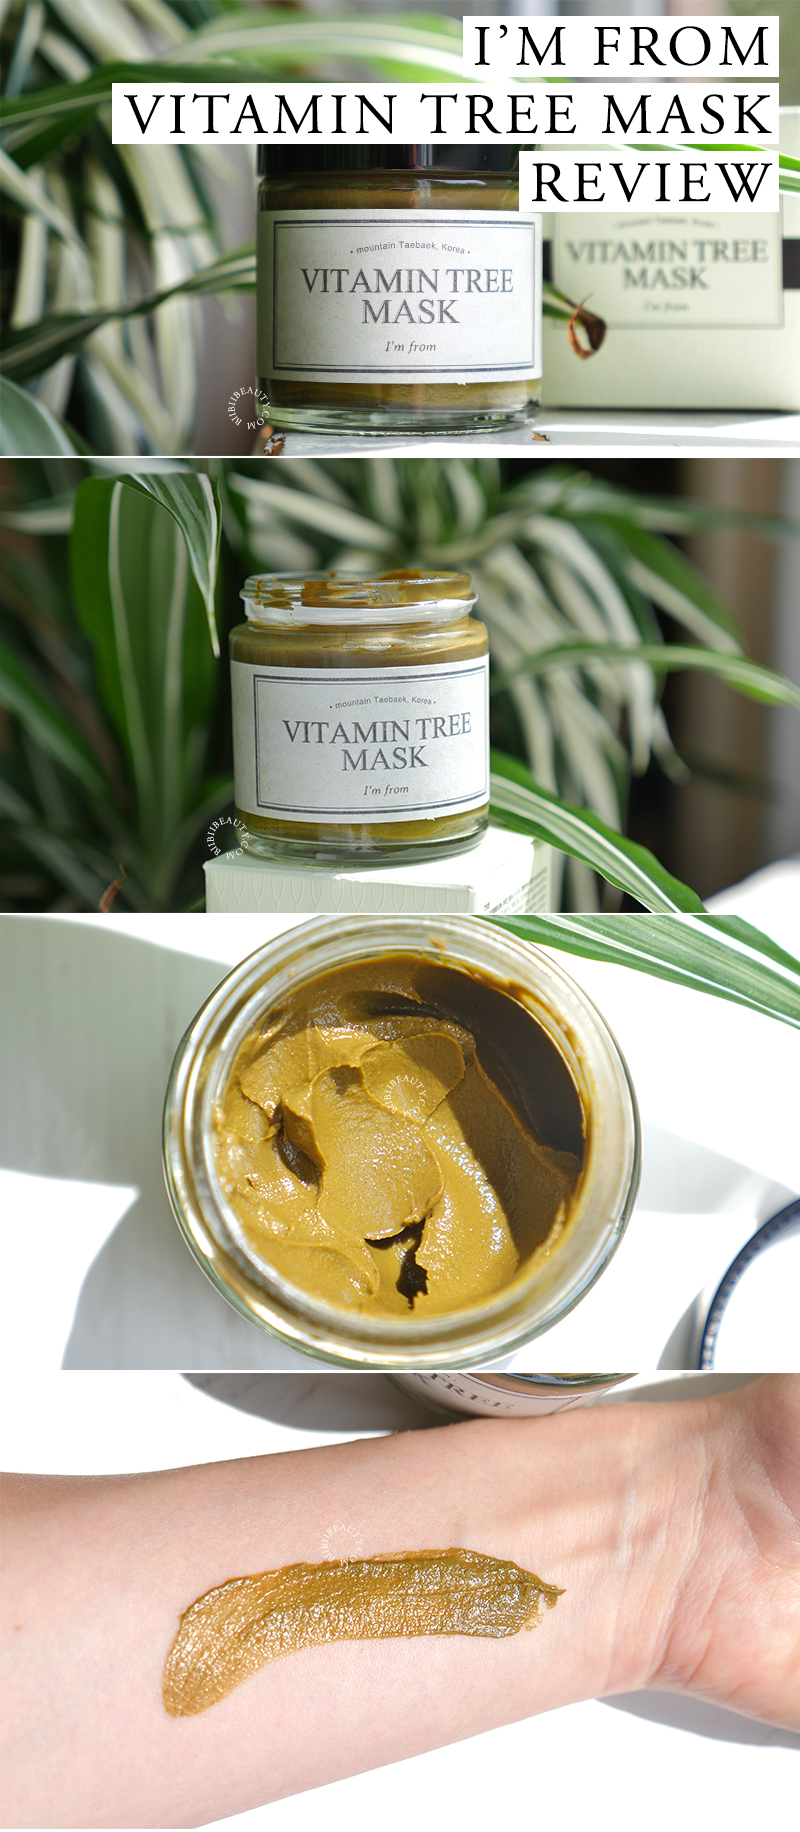 I'M FROM Vitamin Tree Mask Review | Vitamins for skin